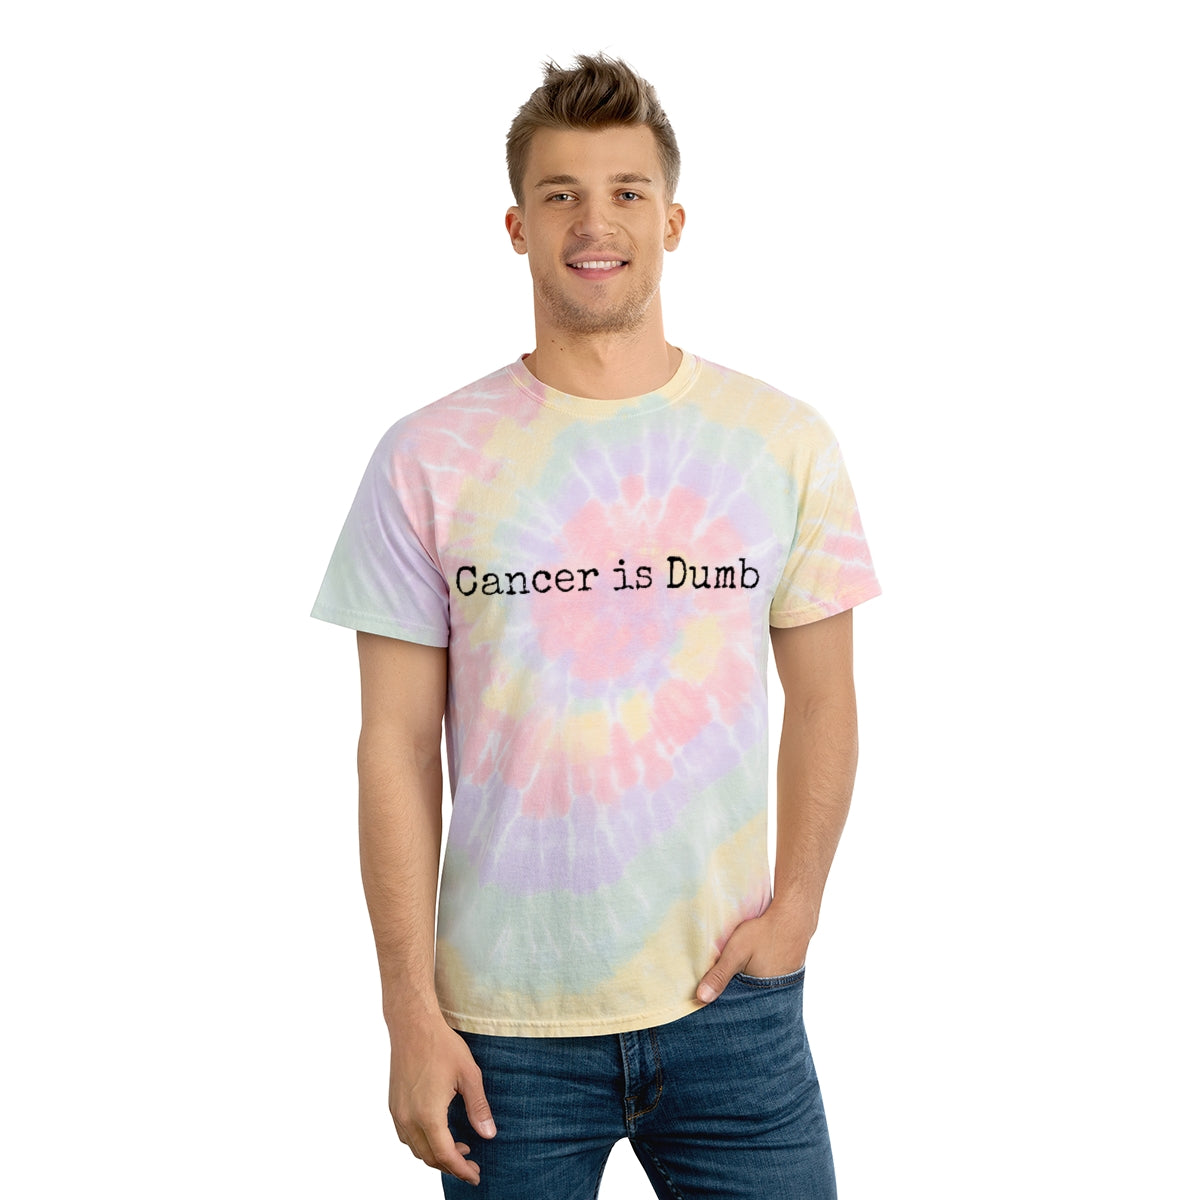 Tie-Dye Tee, Spiral T Shirt tshirt Anti Cancer Cancer is Dumb Survivor Support Humorous Funny